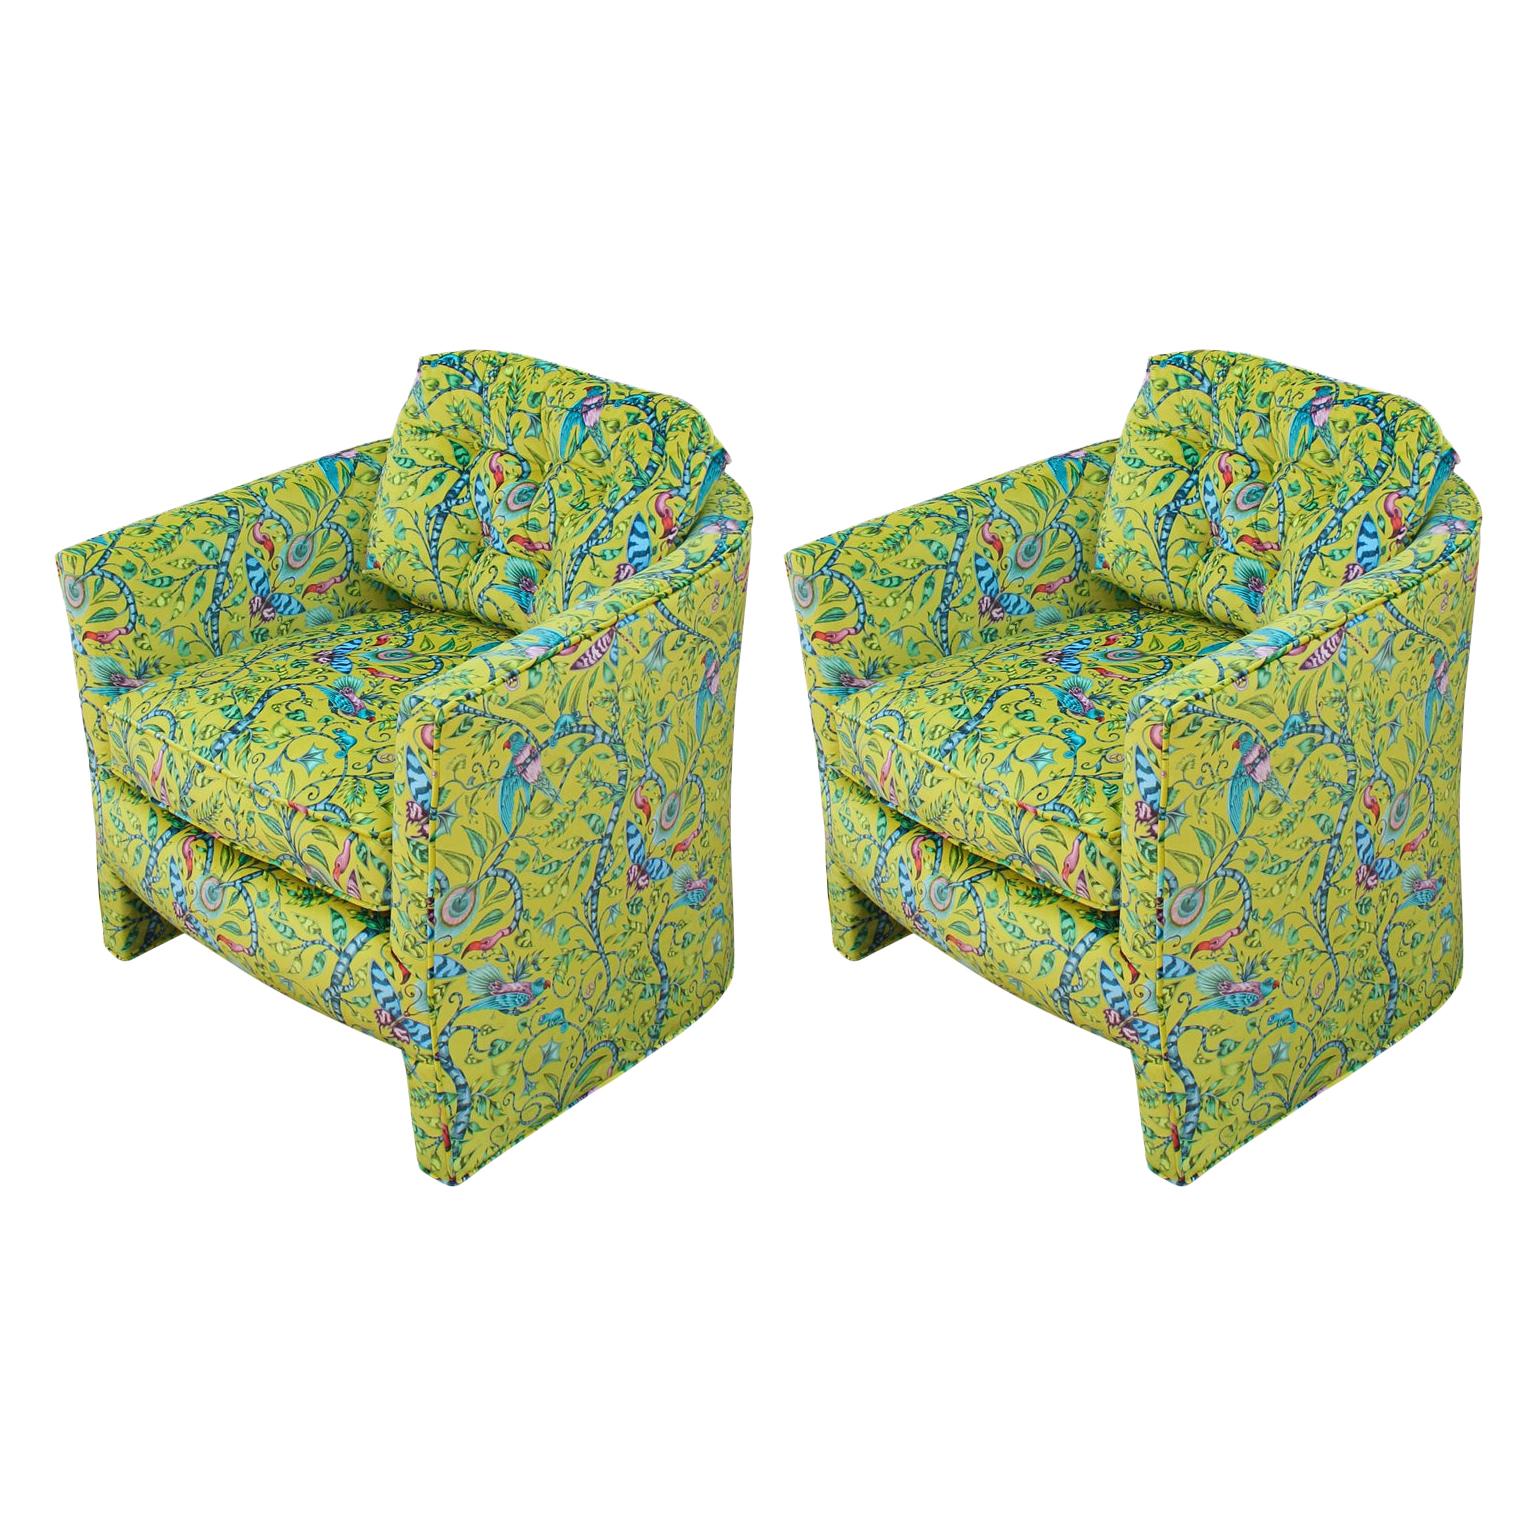 Pair of Newly Upholstered Barrel Back Chairs with Yellow Velvet with Bird Motifs